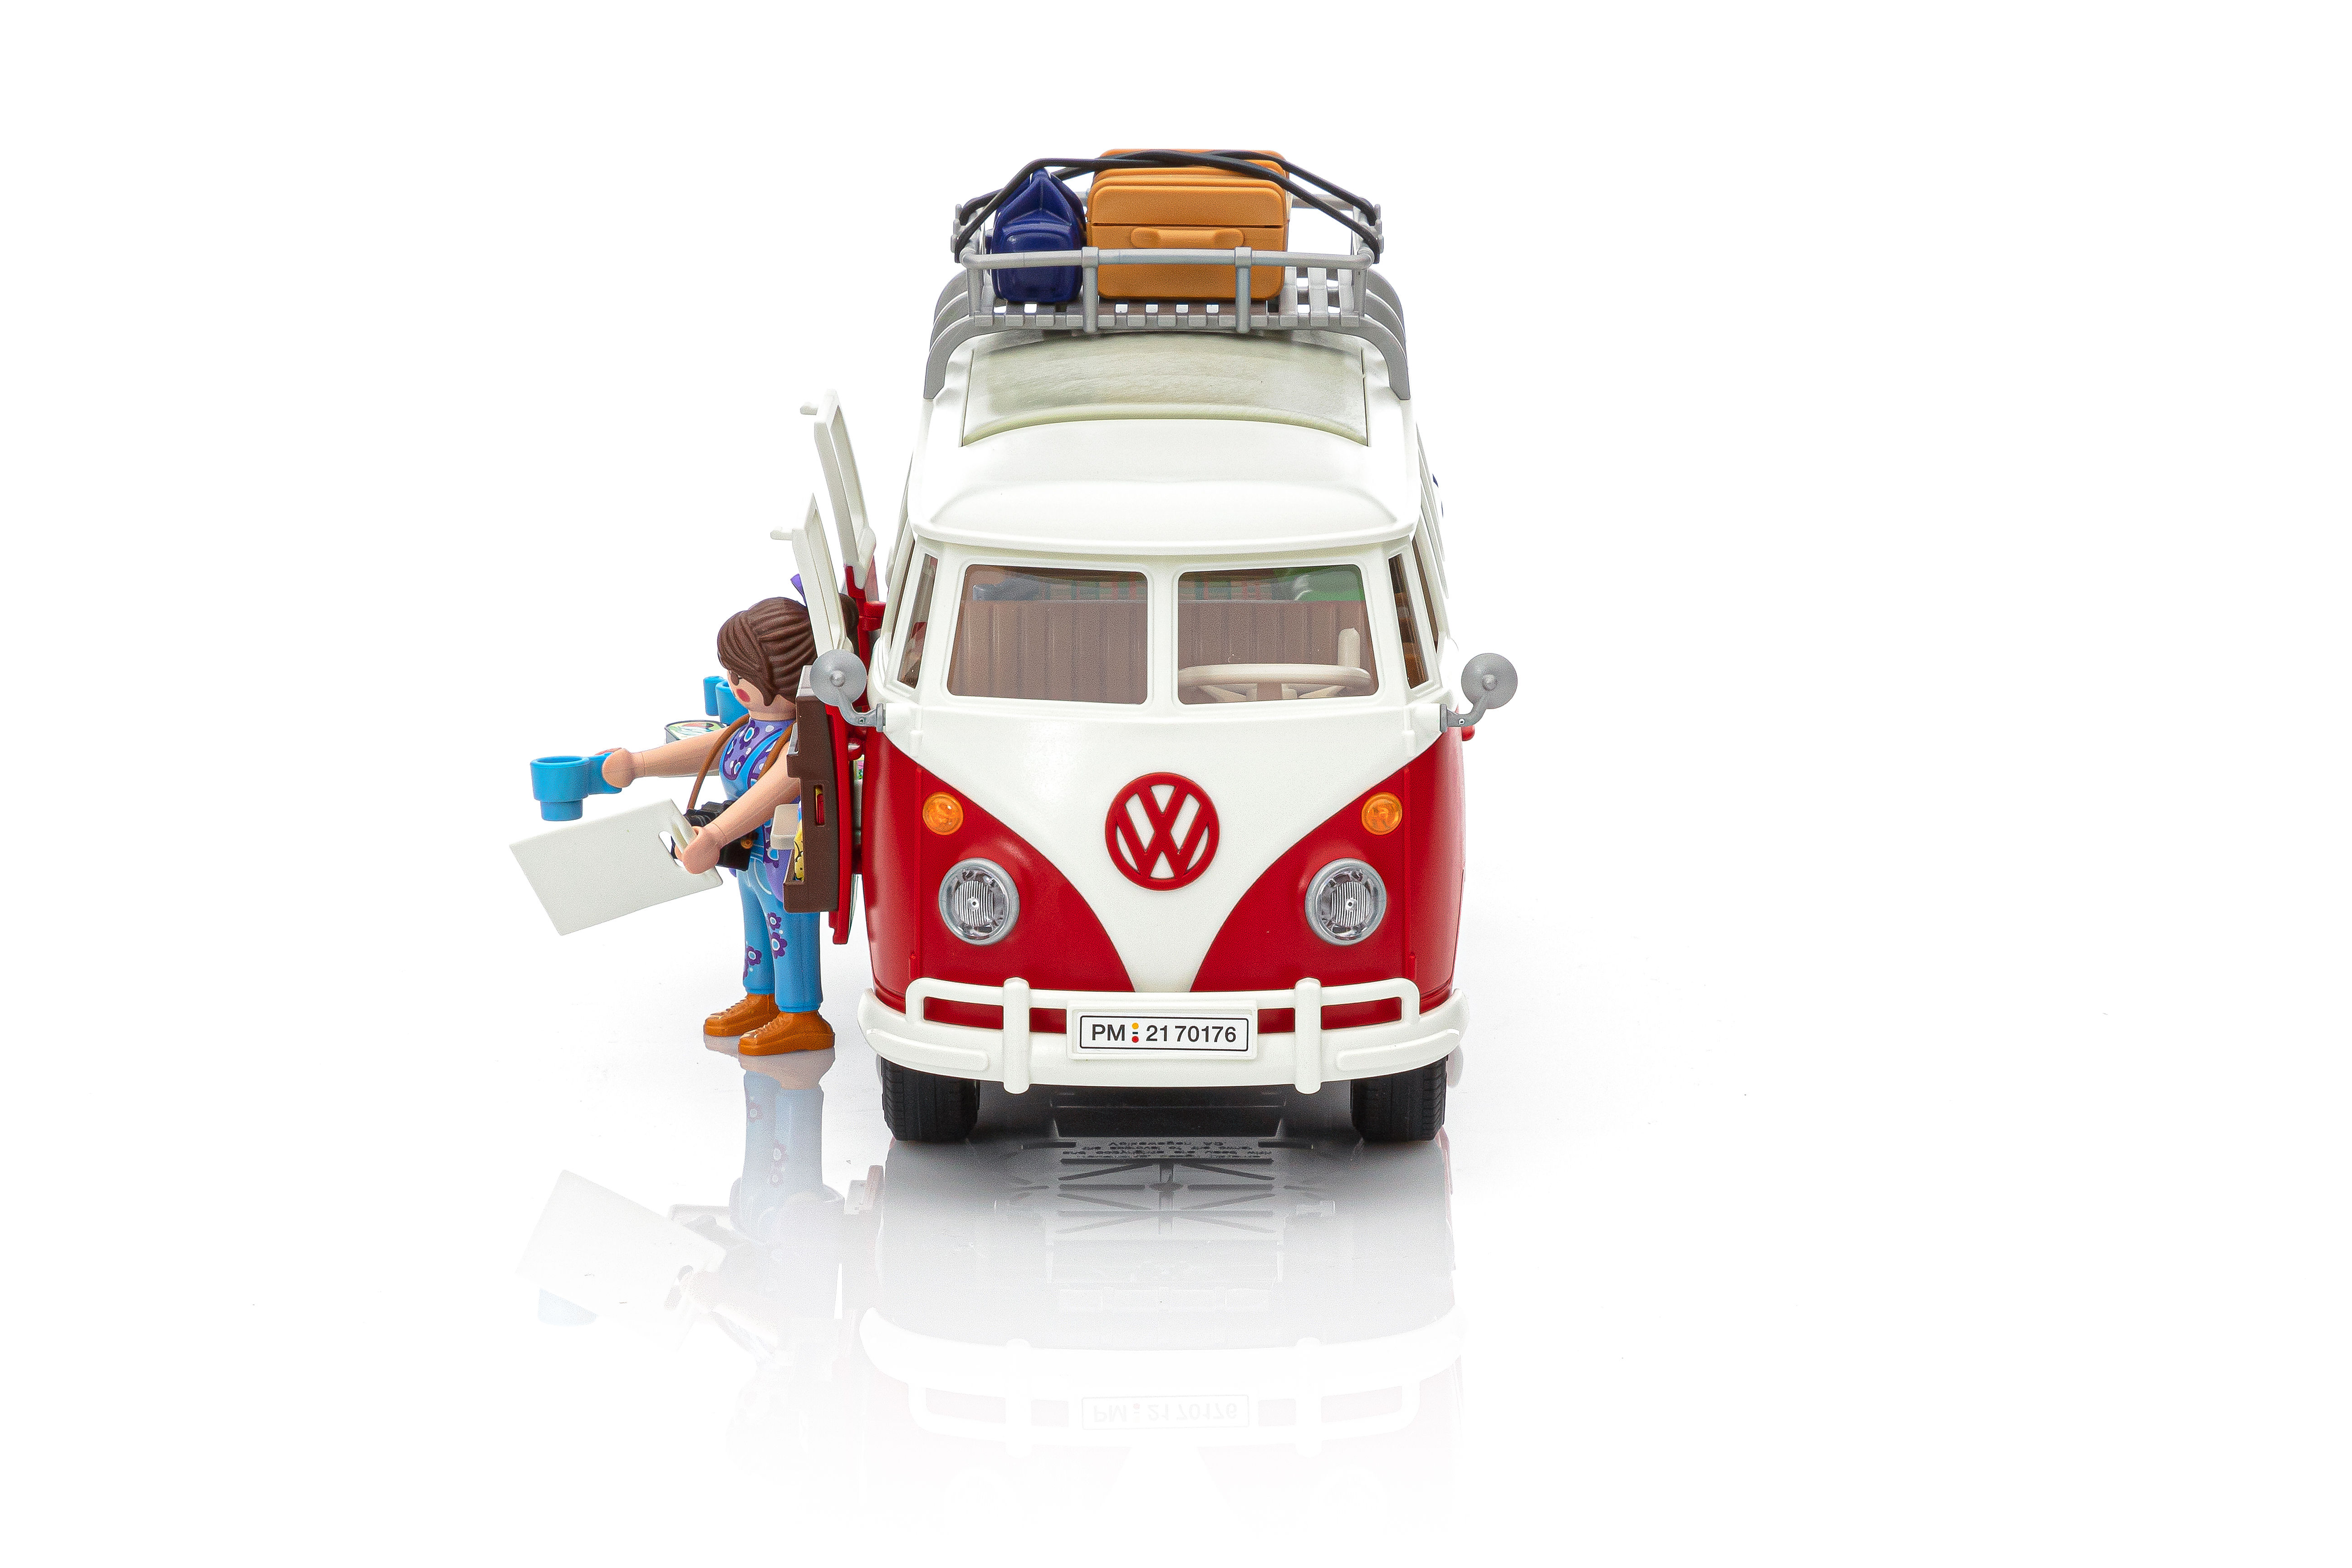 Playmobil's Volkswagen T1 Camping Bus Is a Cheap Thrill for VW Van Fans